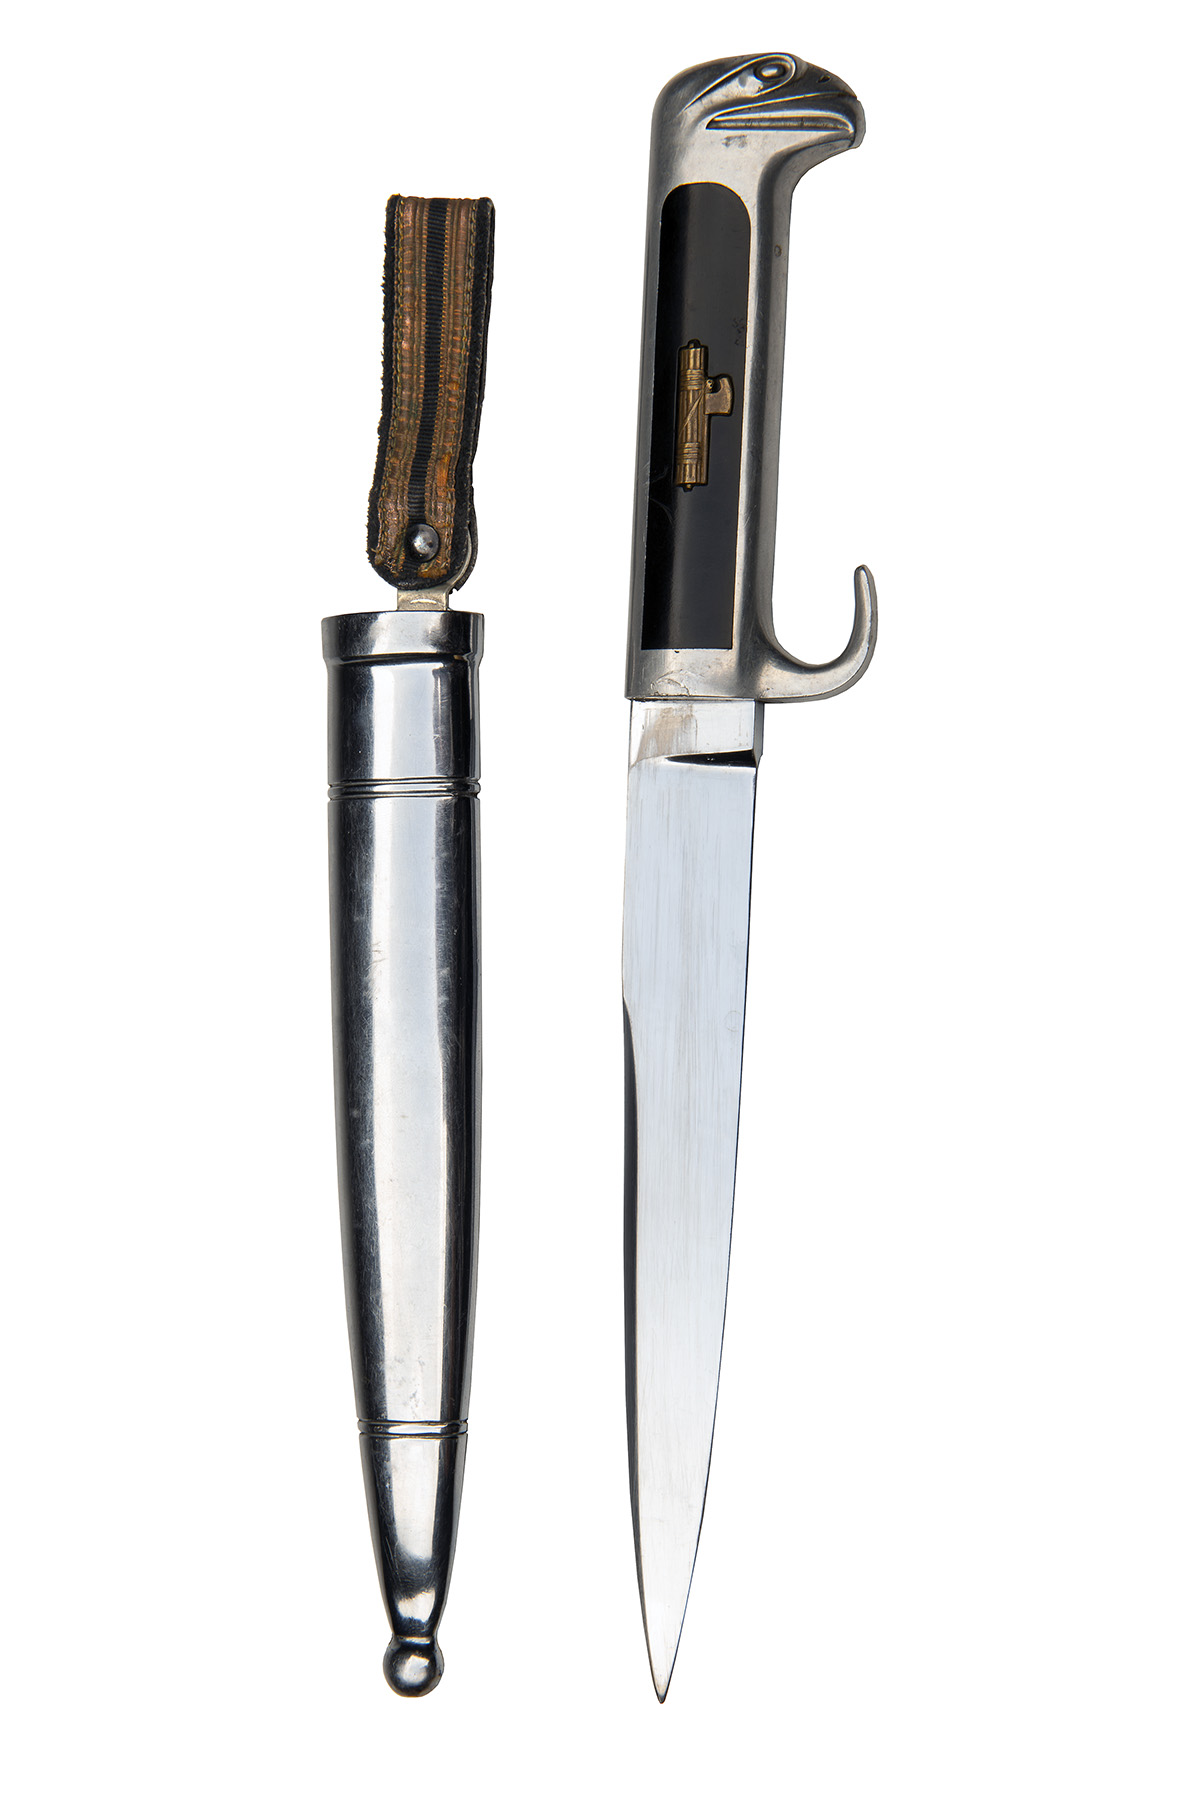 AN ITALIAN WORLD WAR TWO M.V.S.N. OFFICER'S DAGGER, circa 1937, with plain plated 6 3/4in. blade